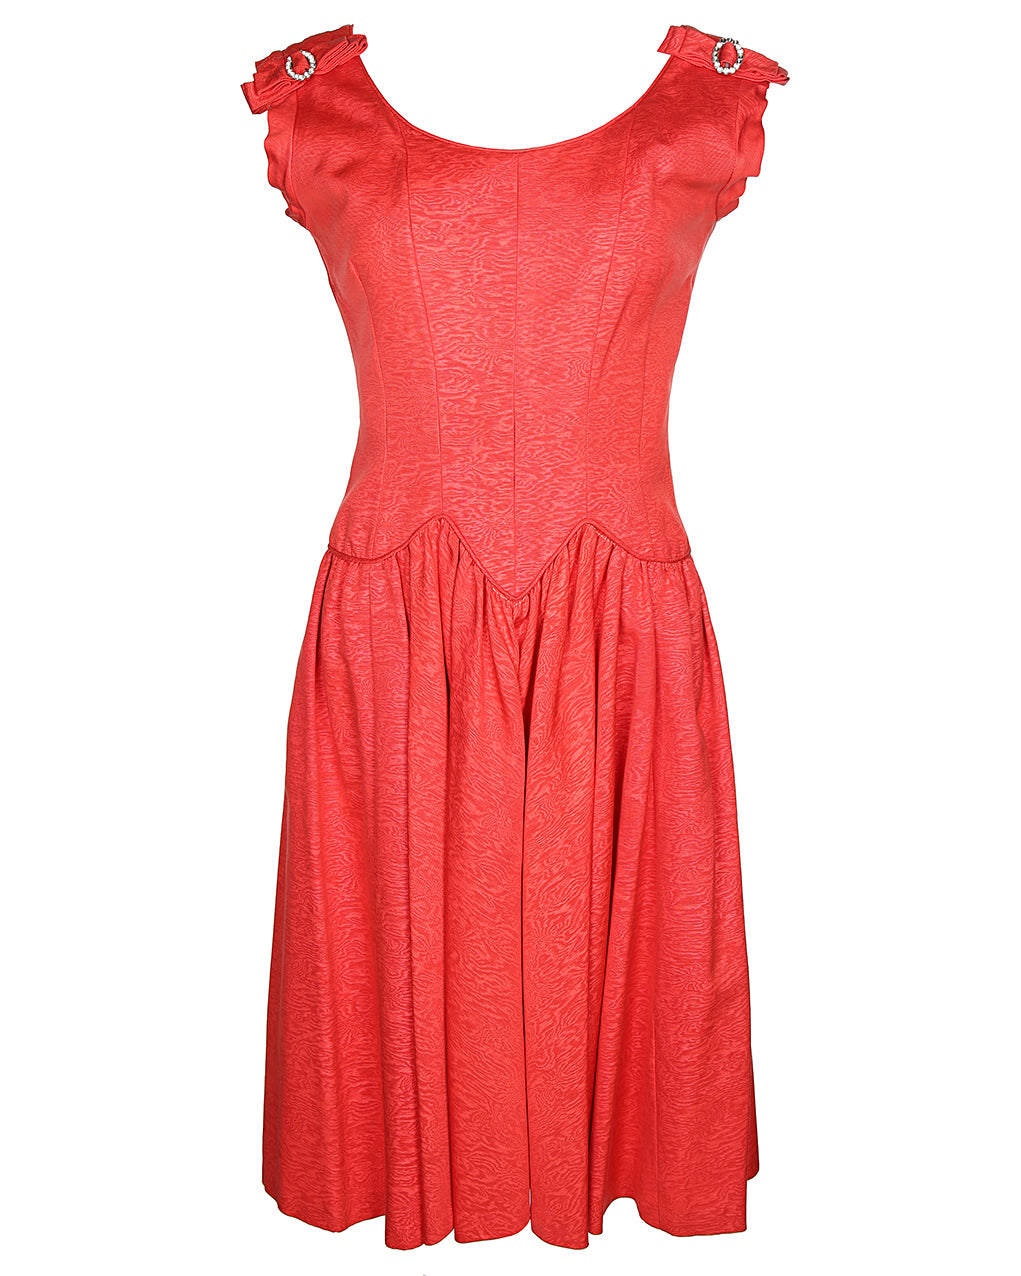 Vintage 50s Red Sleeveless Party Dress - S